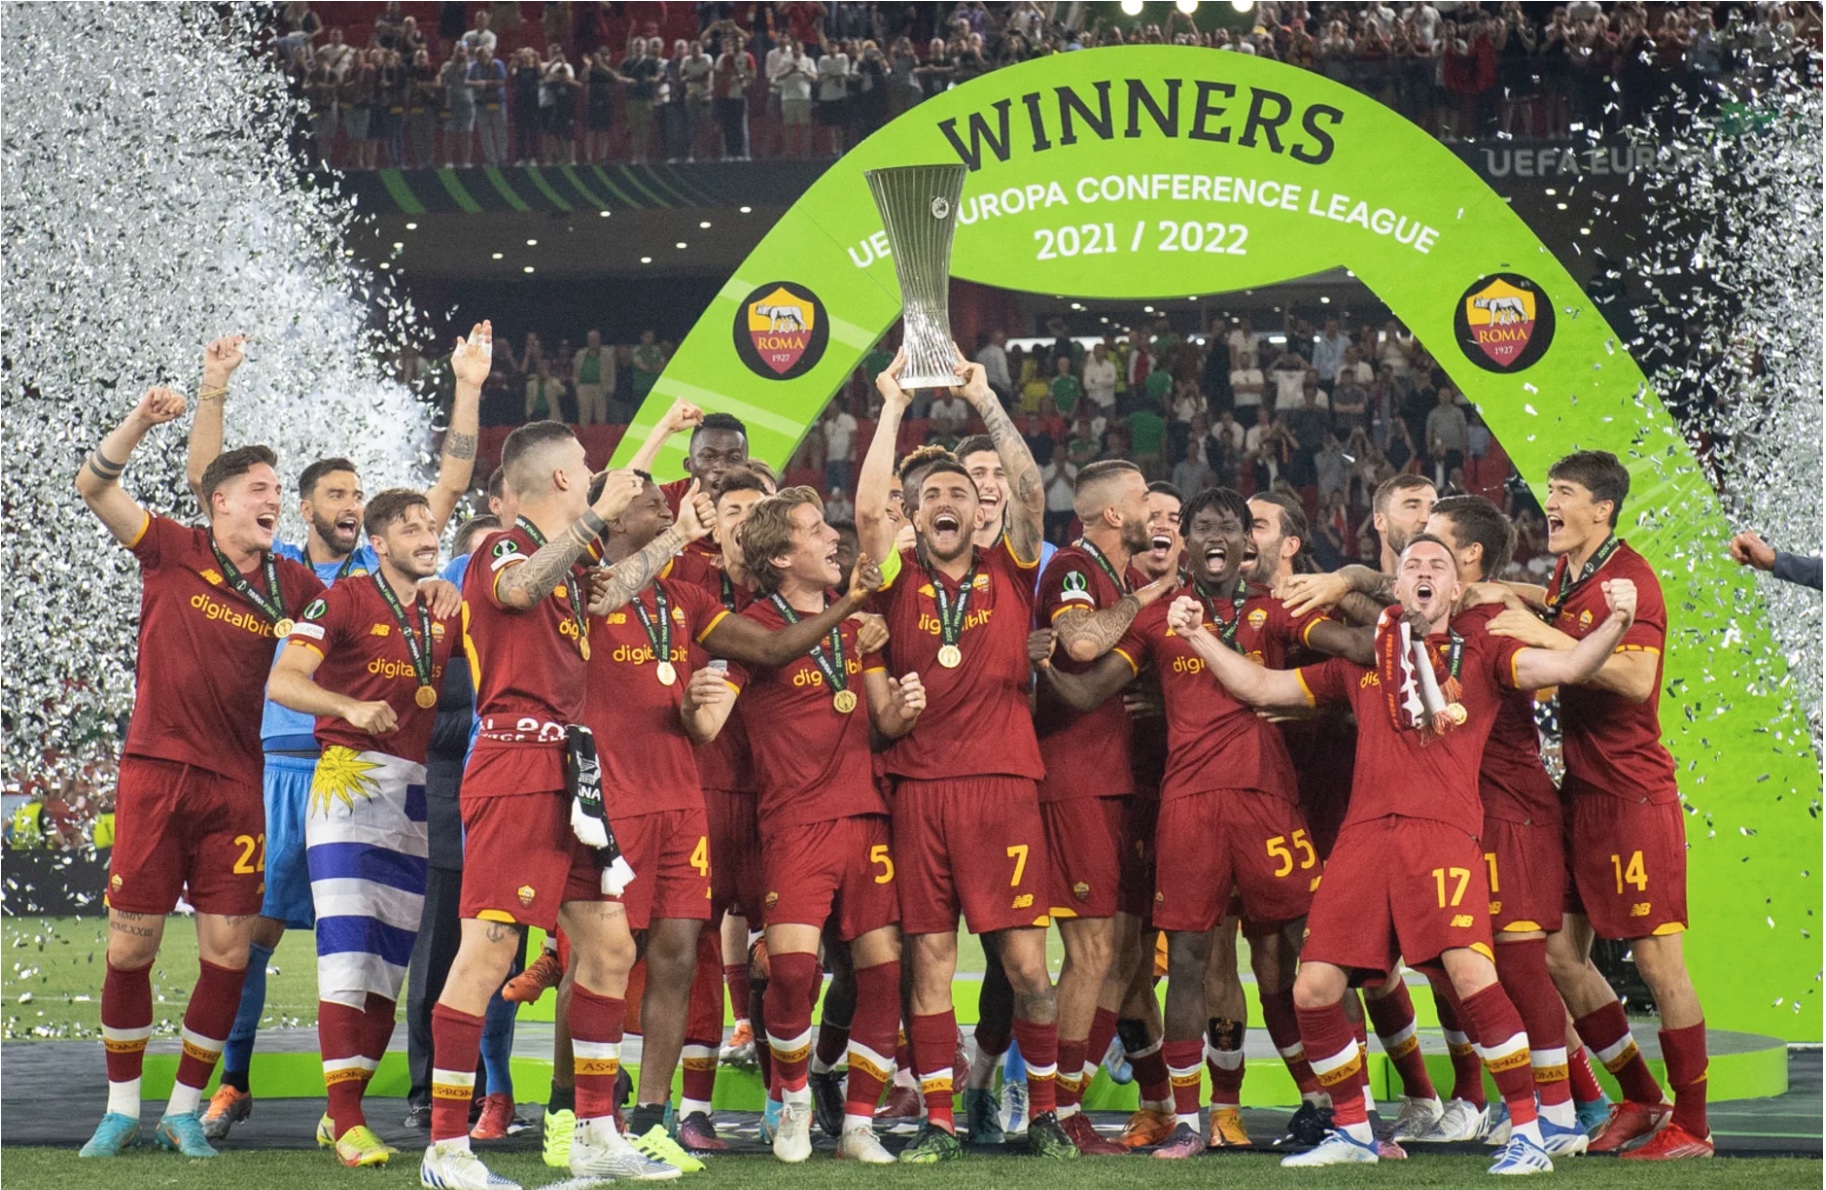 AS Roma winners of Europa Conference League